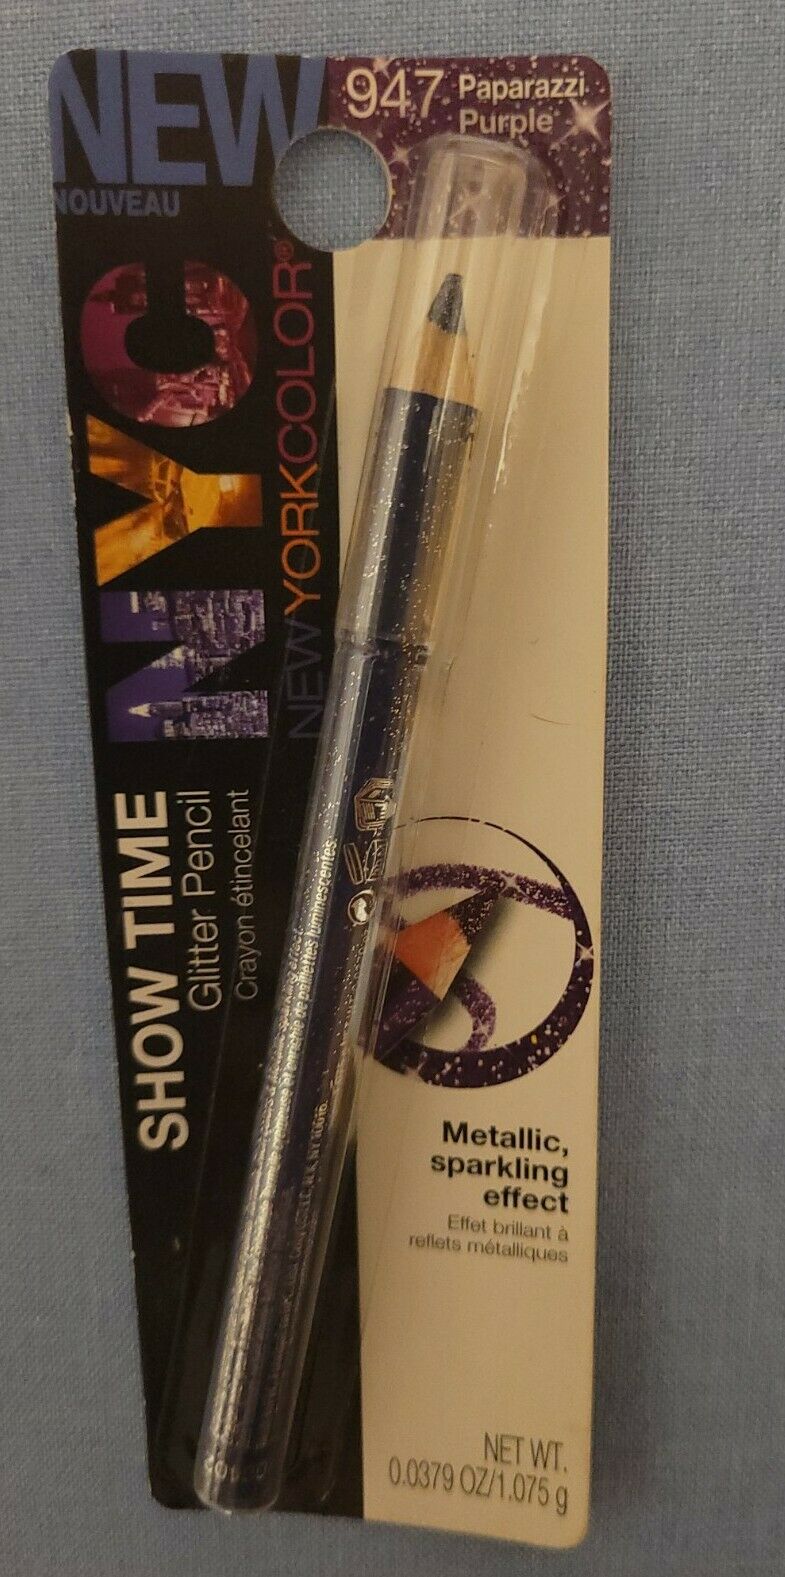 Nyc Show Time Glitter Eyeliner Pencil 947 Paparazzi Purple - Showtime Eye Liner